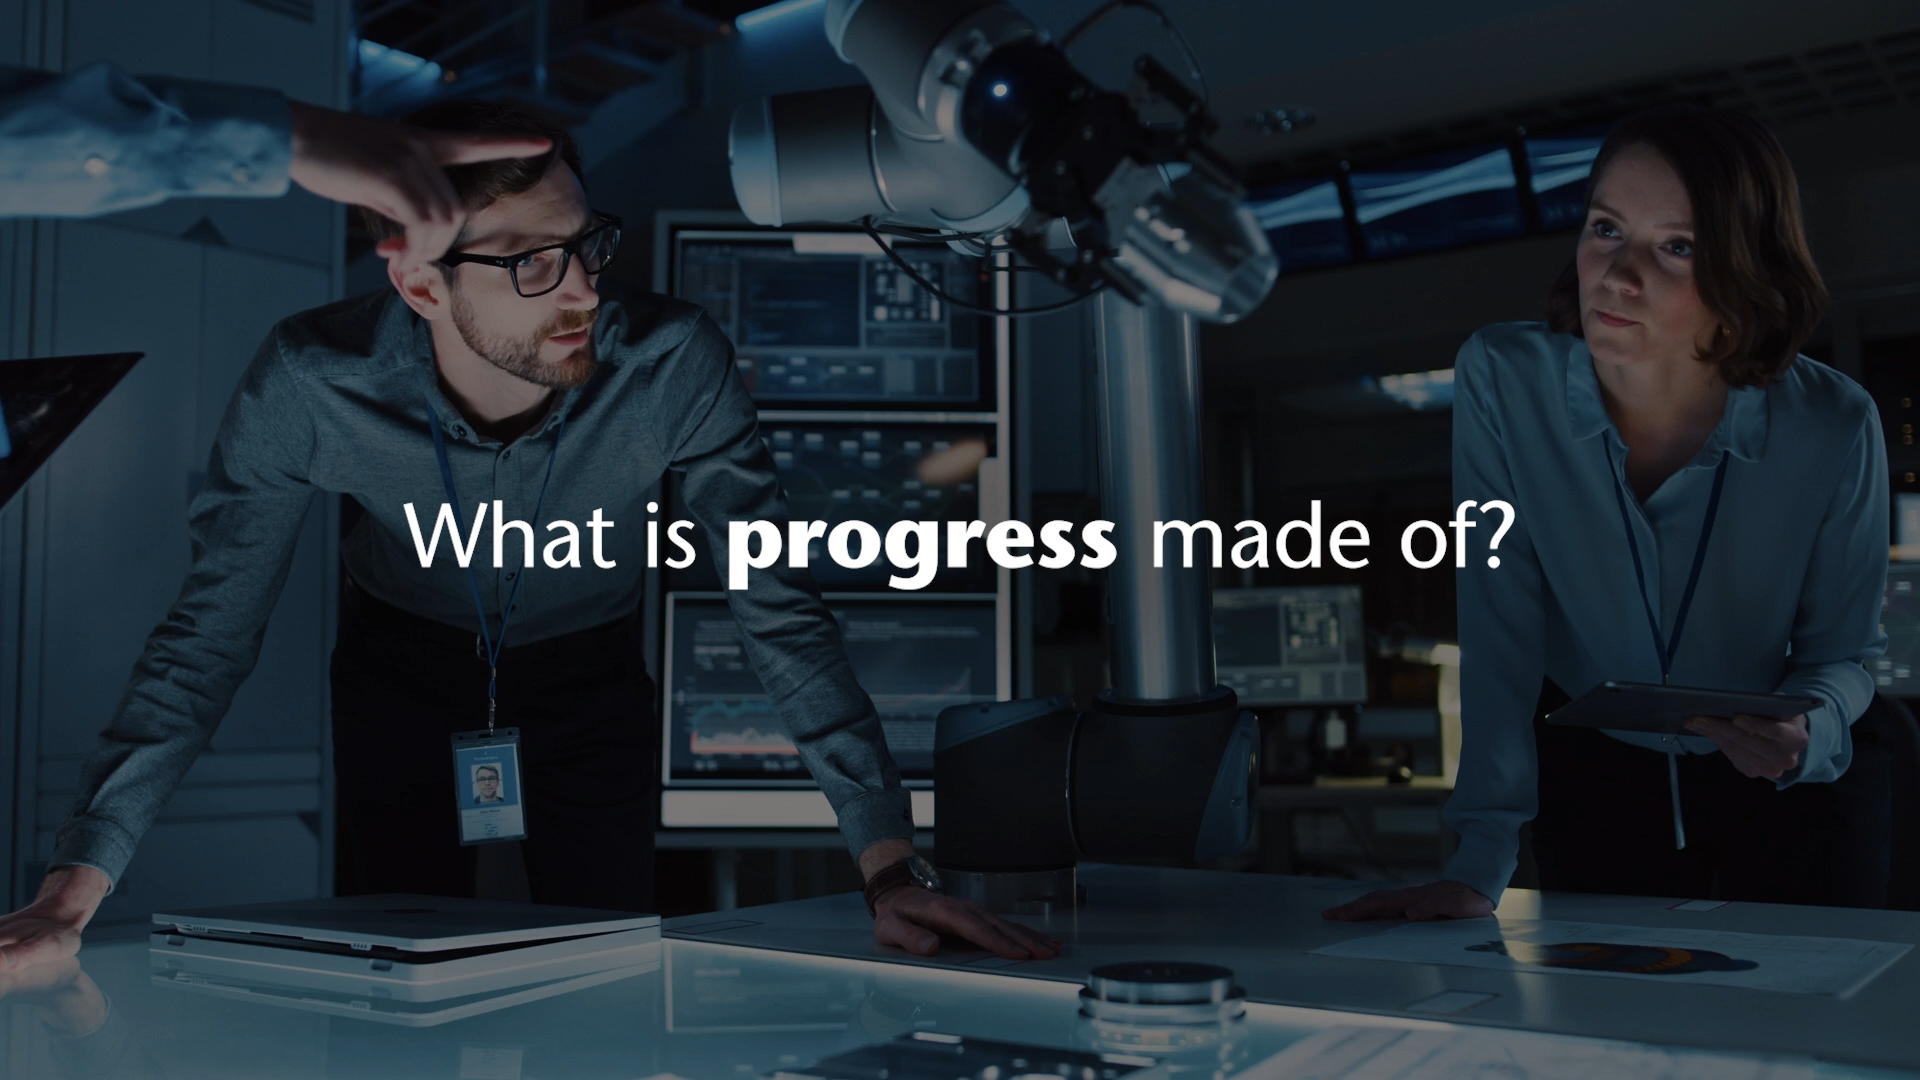 Click to find out what progress is made of at SCHOTT.